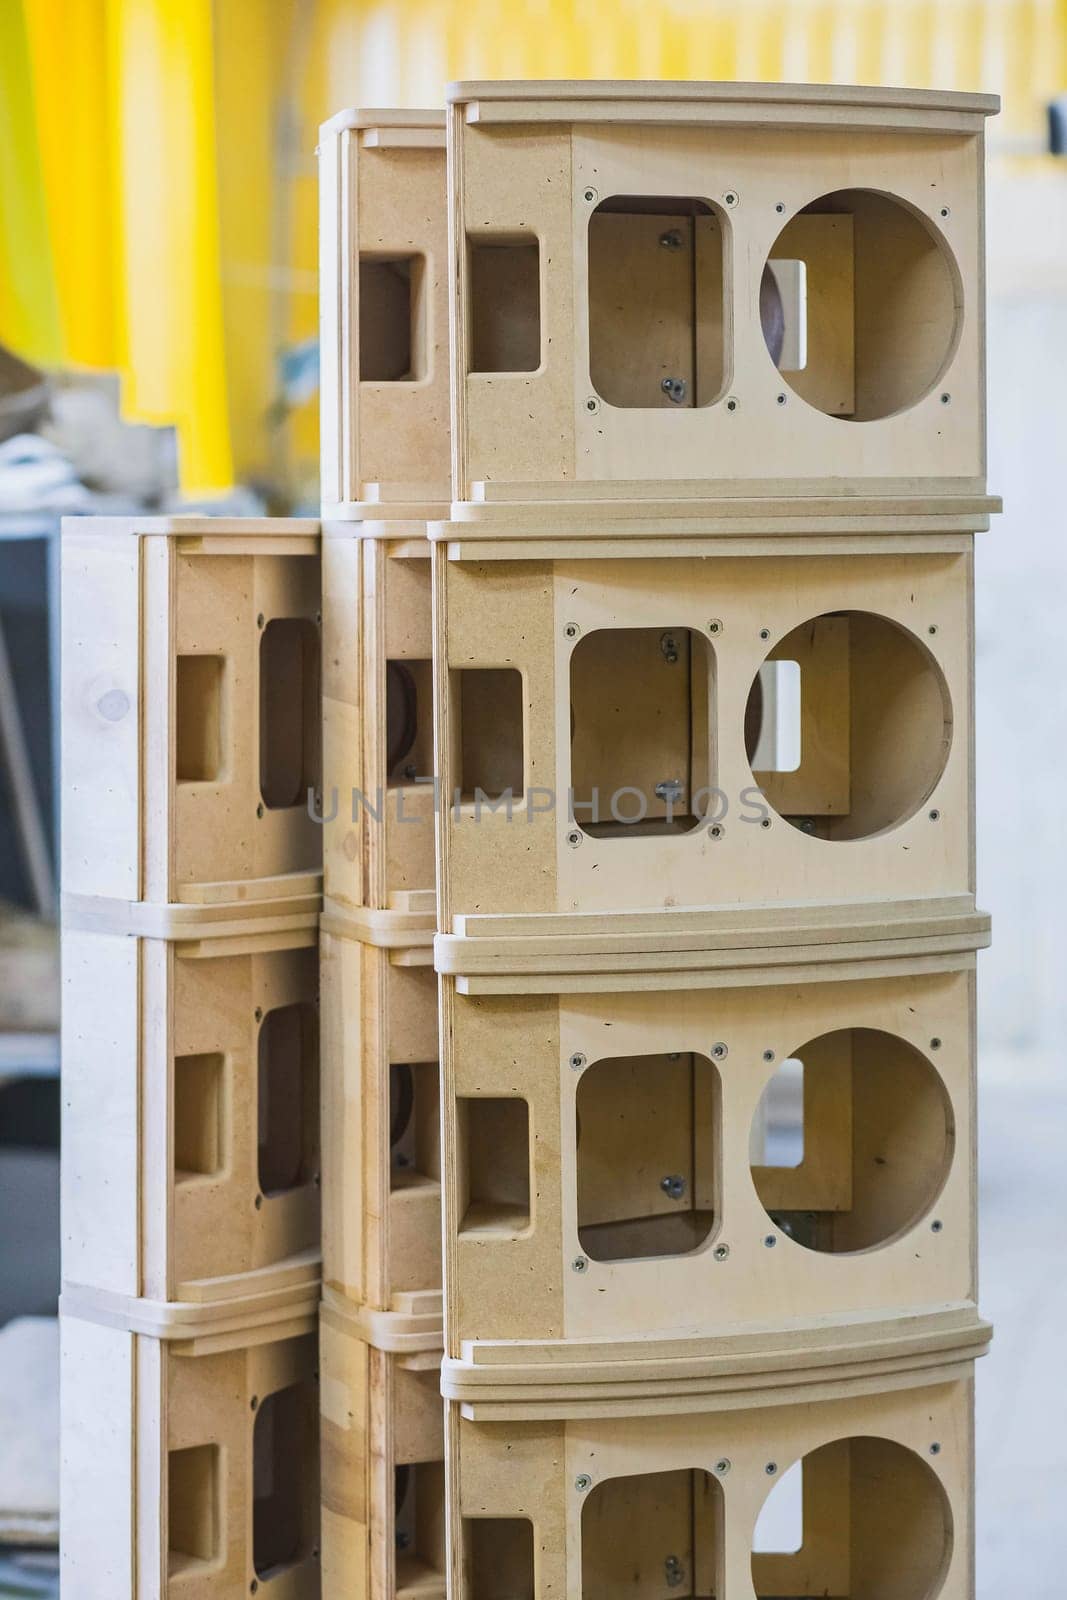 wooden bases Audio Speakers stacked like a tower at the factory.